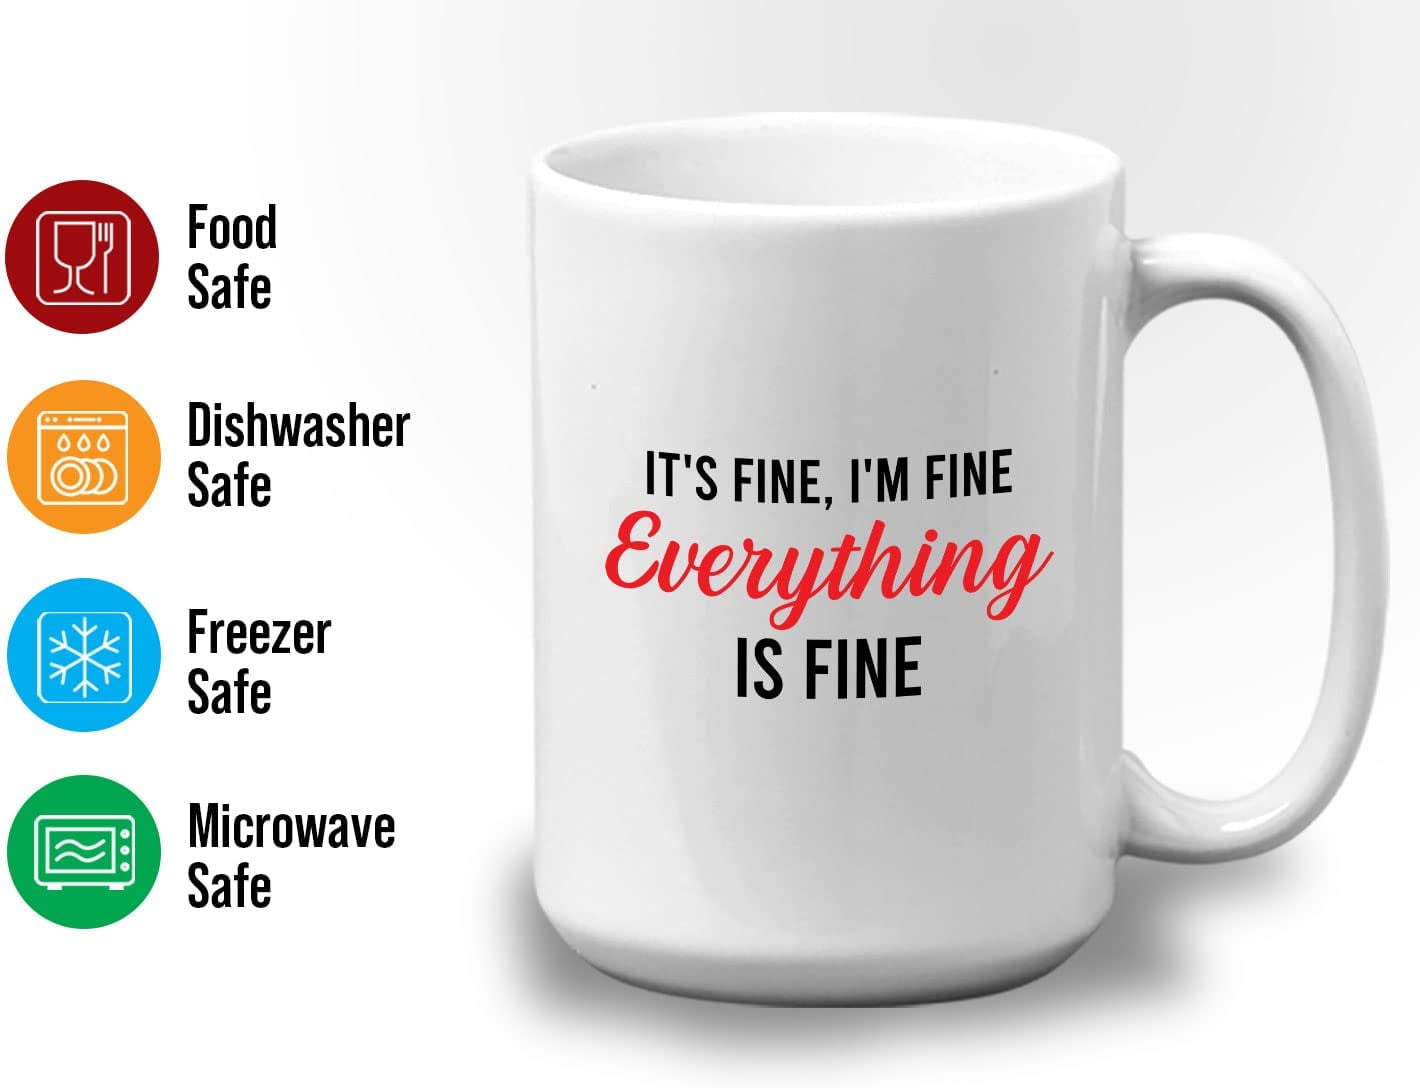 Encouragement Coffee Mug 15 oz, Its Fine Im Fine Everything Is Fine Funny Humor Meme Appreciation Gift for Brother Sister Best Friend Boss Coworkers